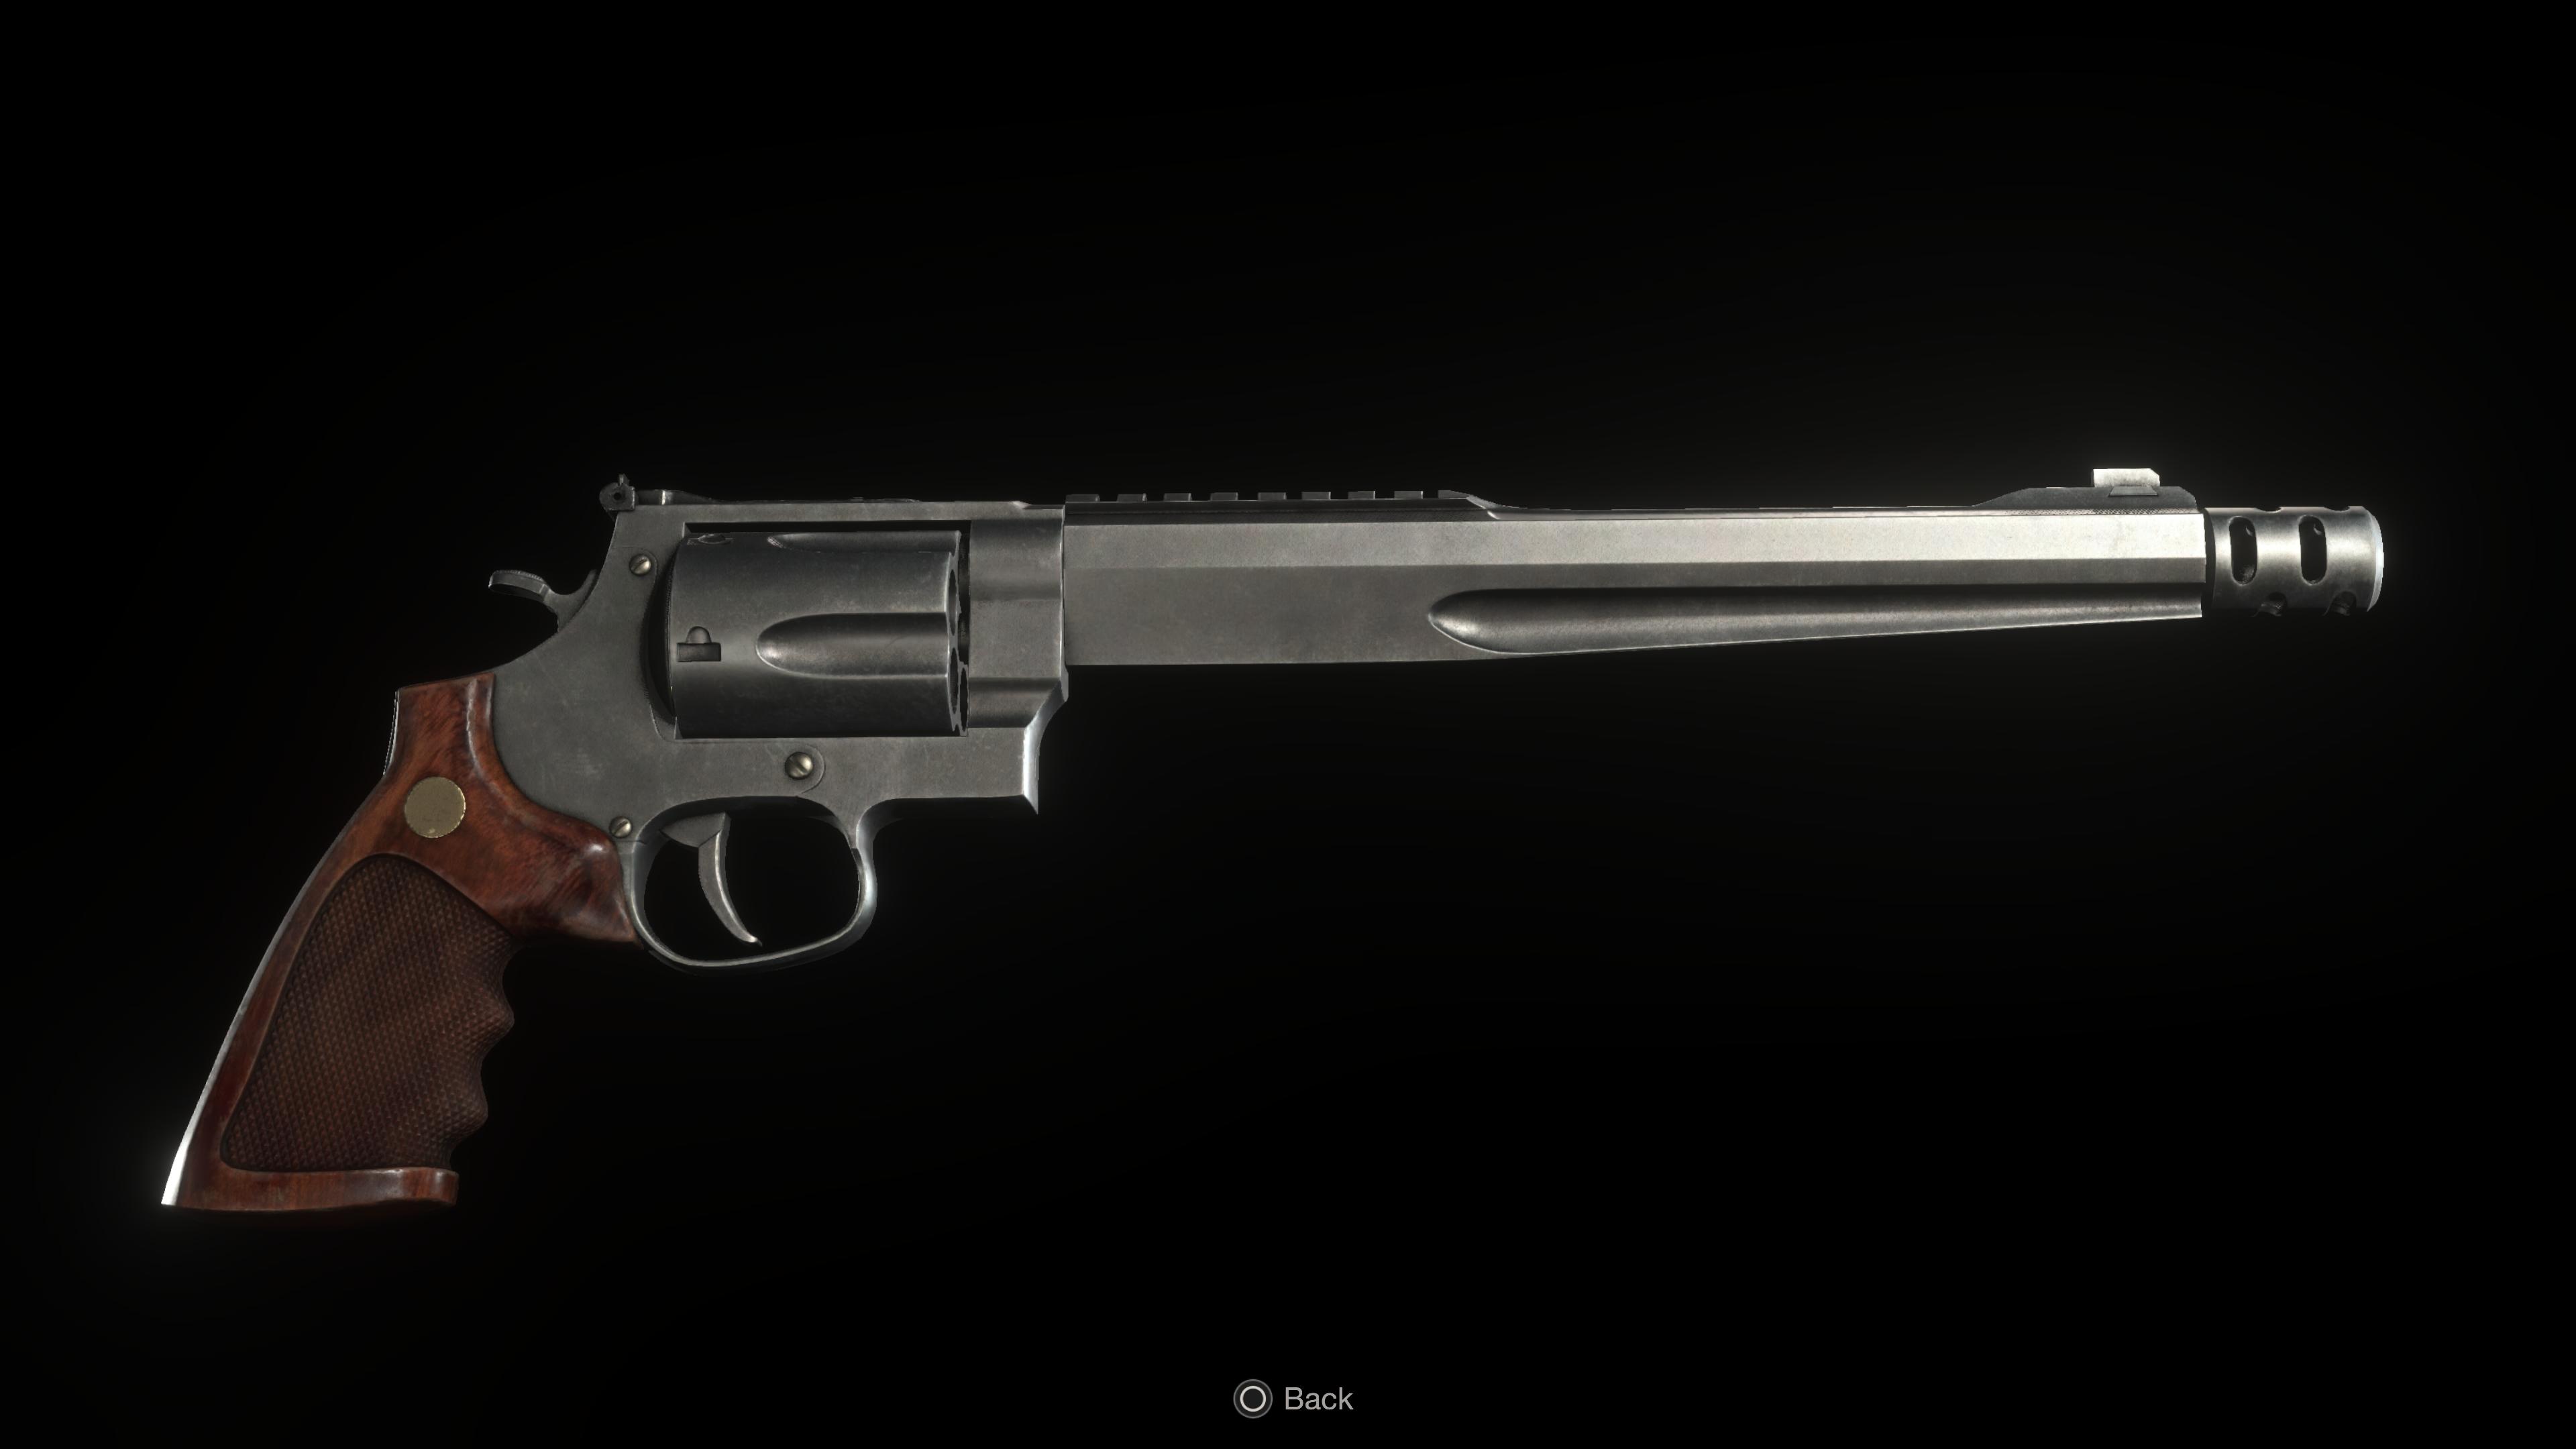 How to get the Handcannon in Resident Evil 4 Remake - Video Games on Sports  Illustrated